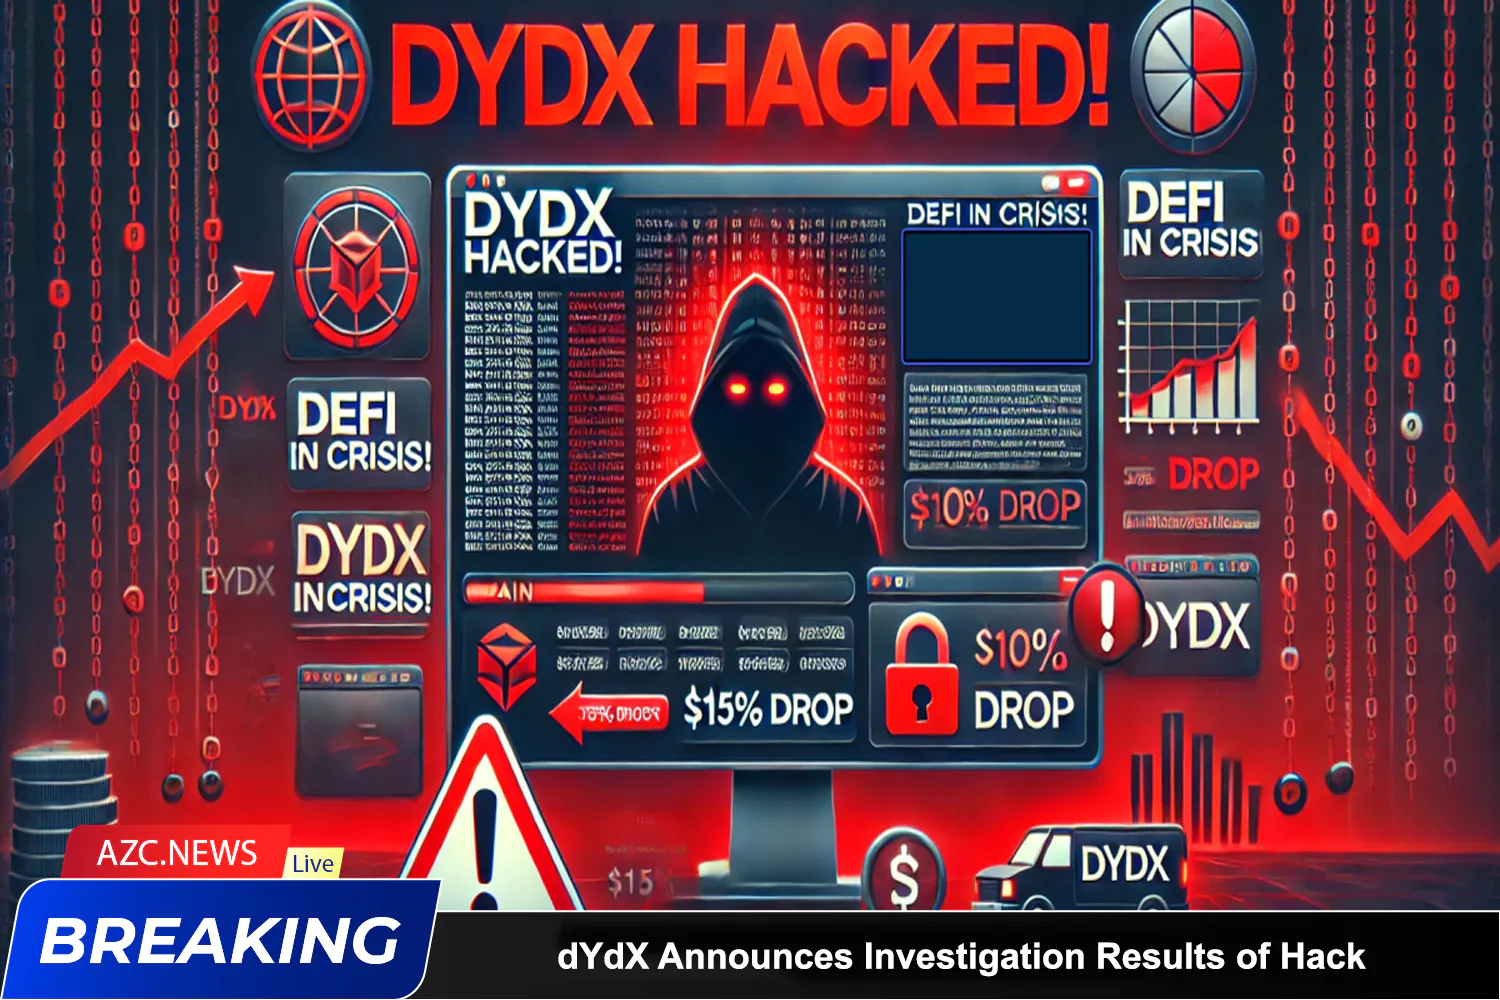 Azcnews Dydx Announces Investigation Results Of Hack Leading To Significant Losses